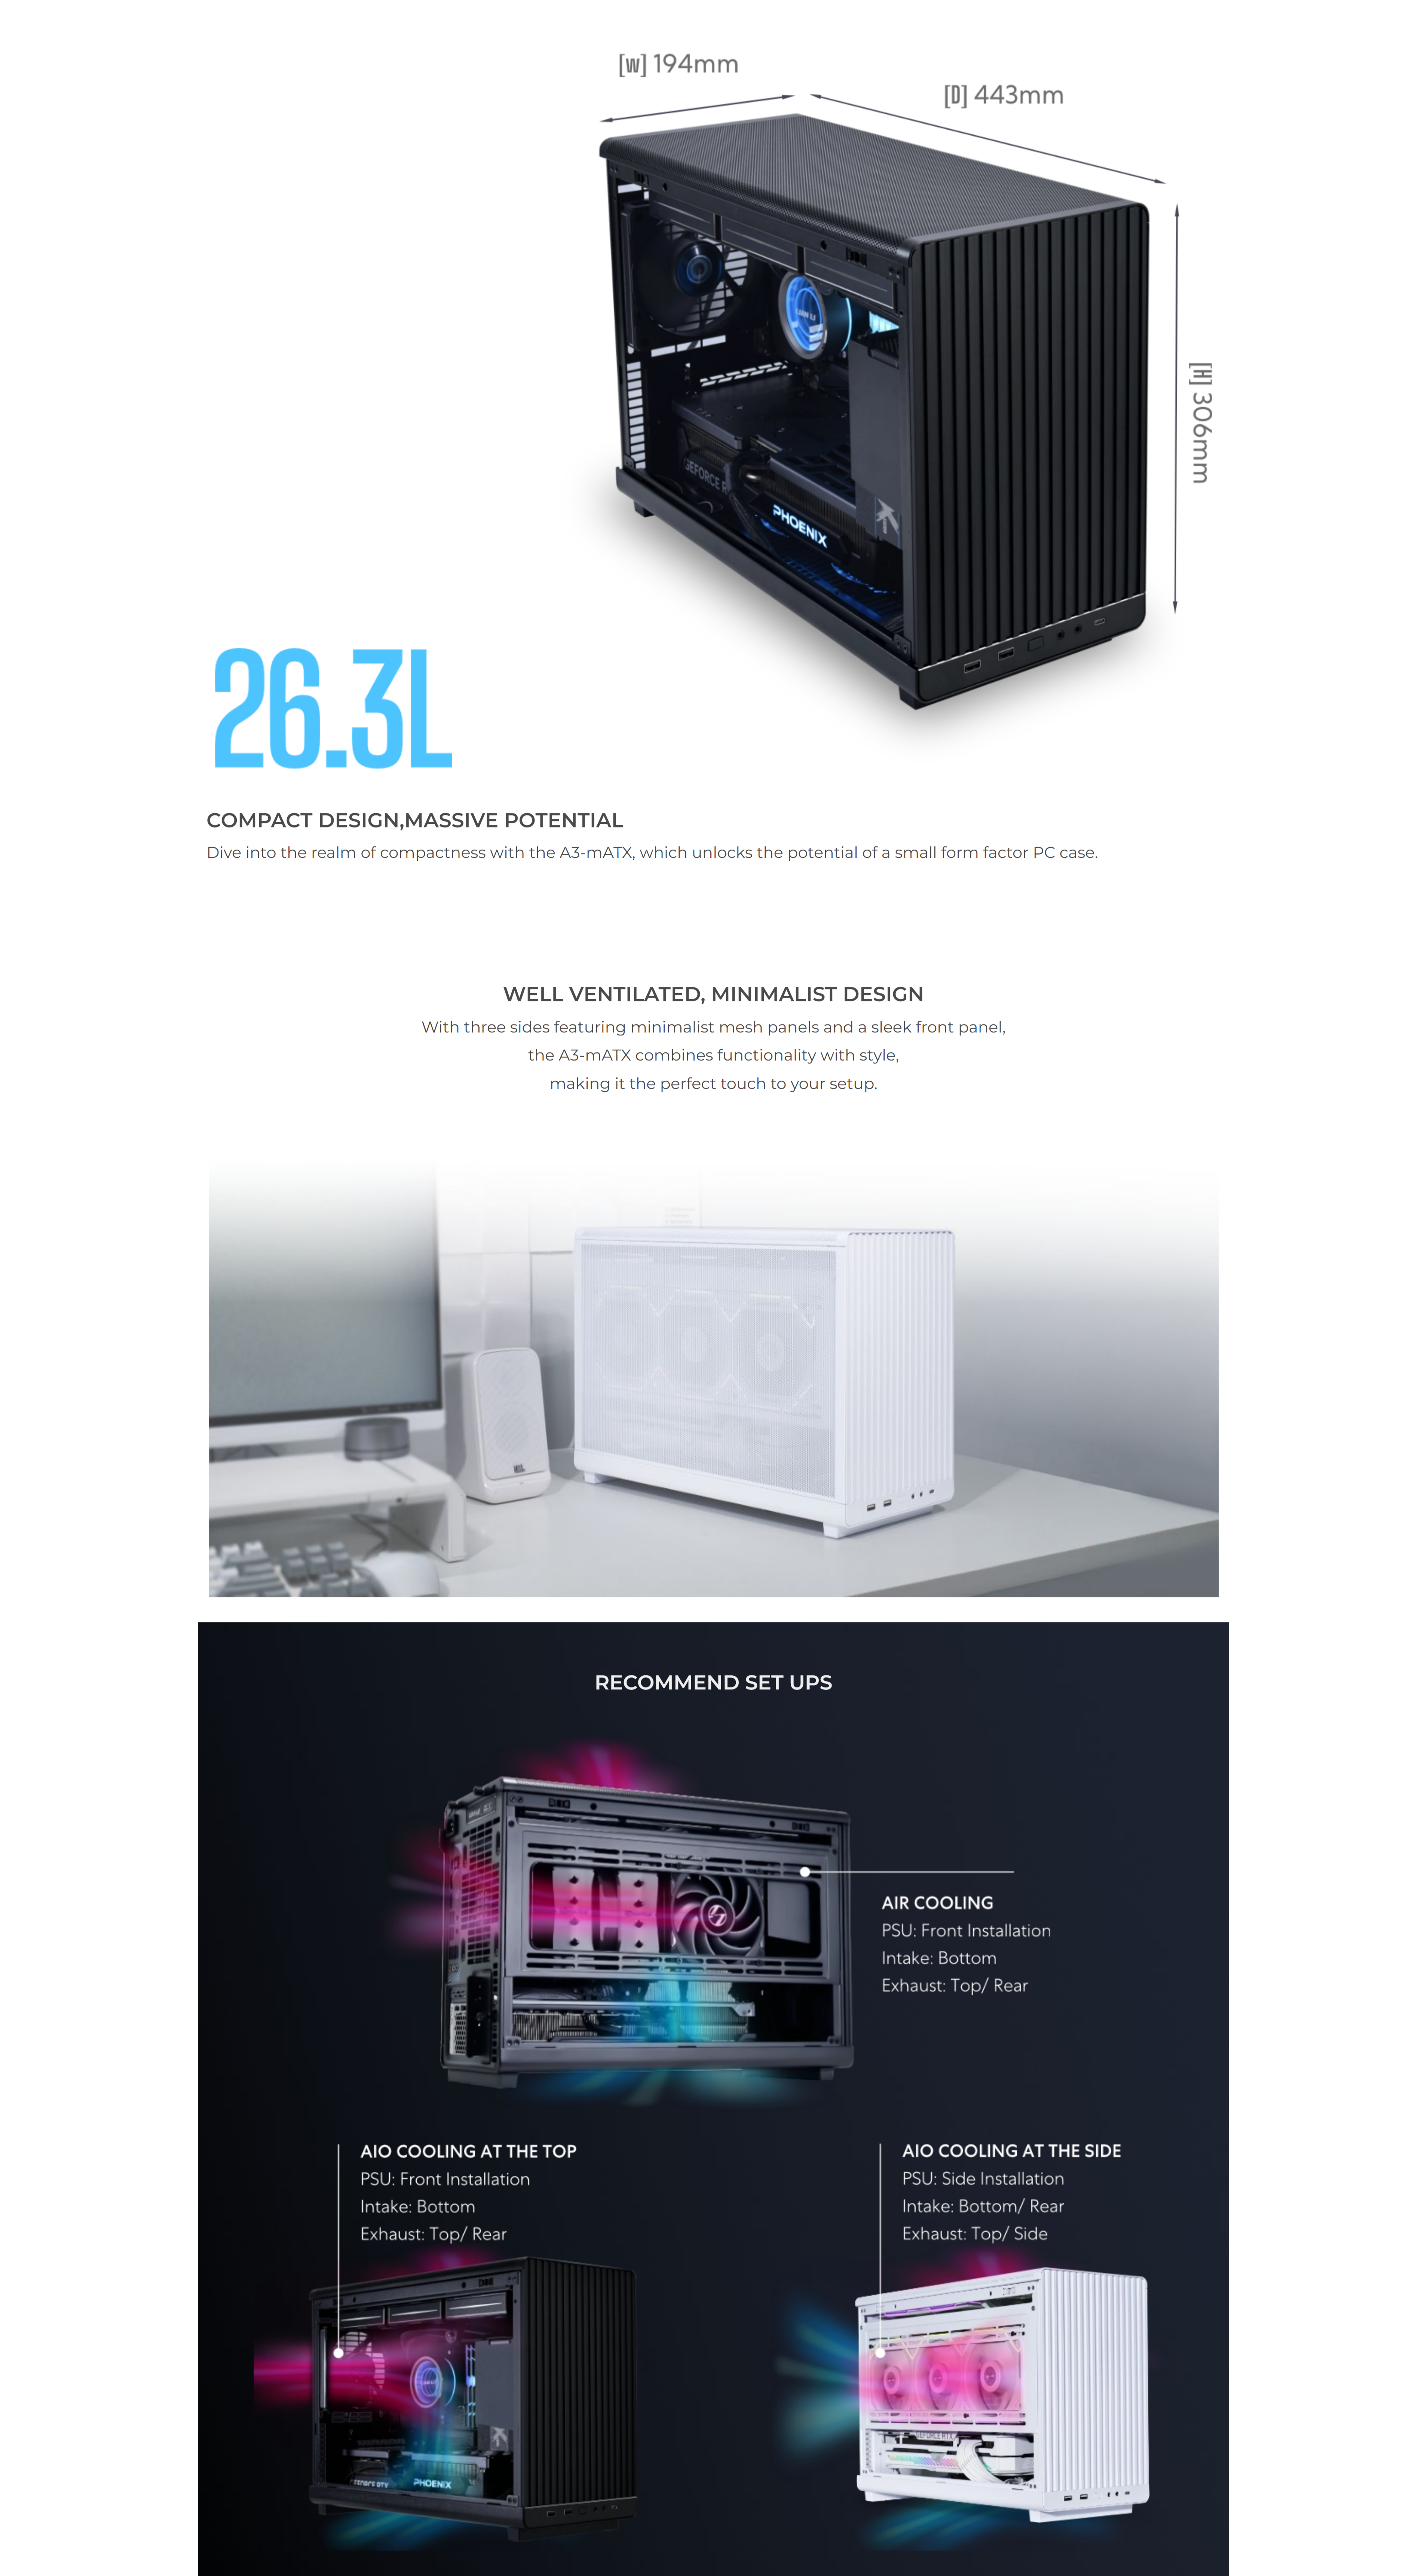 A large marketing image providing additional information about the product Lian Li A3 mATX Case - Black - Additional alt info not provided